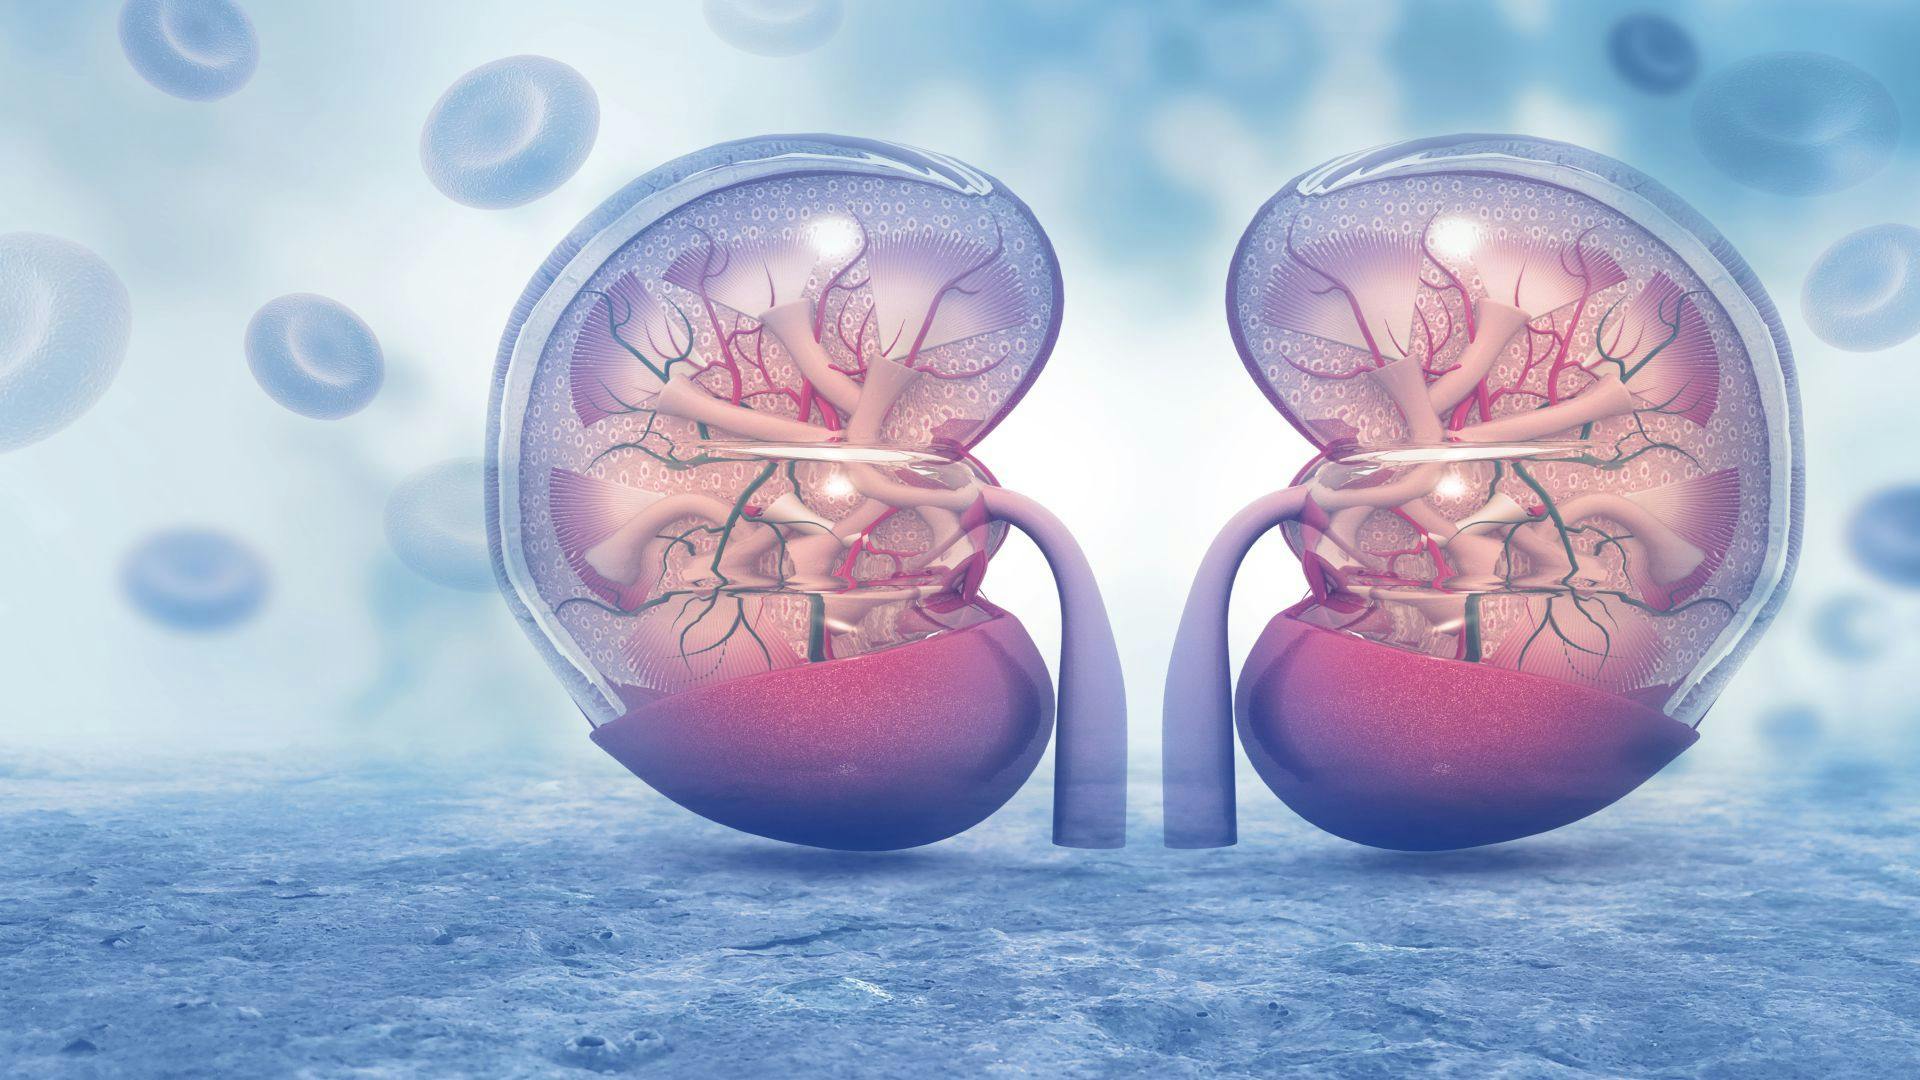 Reduced Kidney Function Linked to an Increased Risk of Community-Acquired Infections